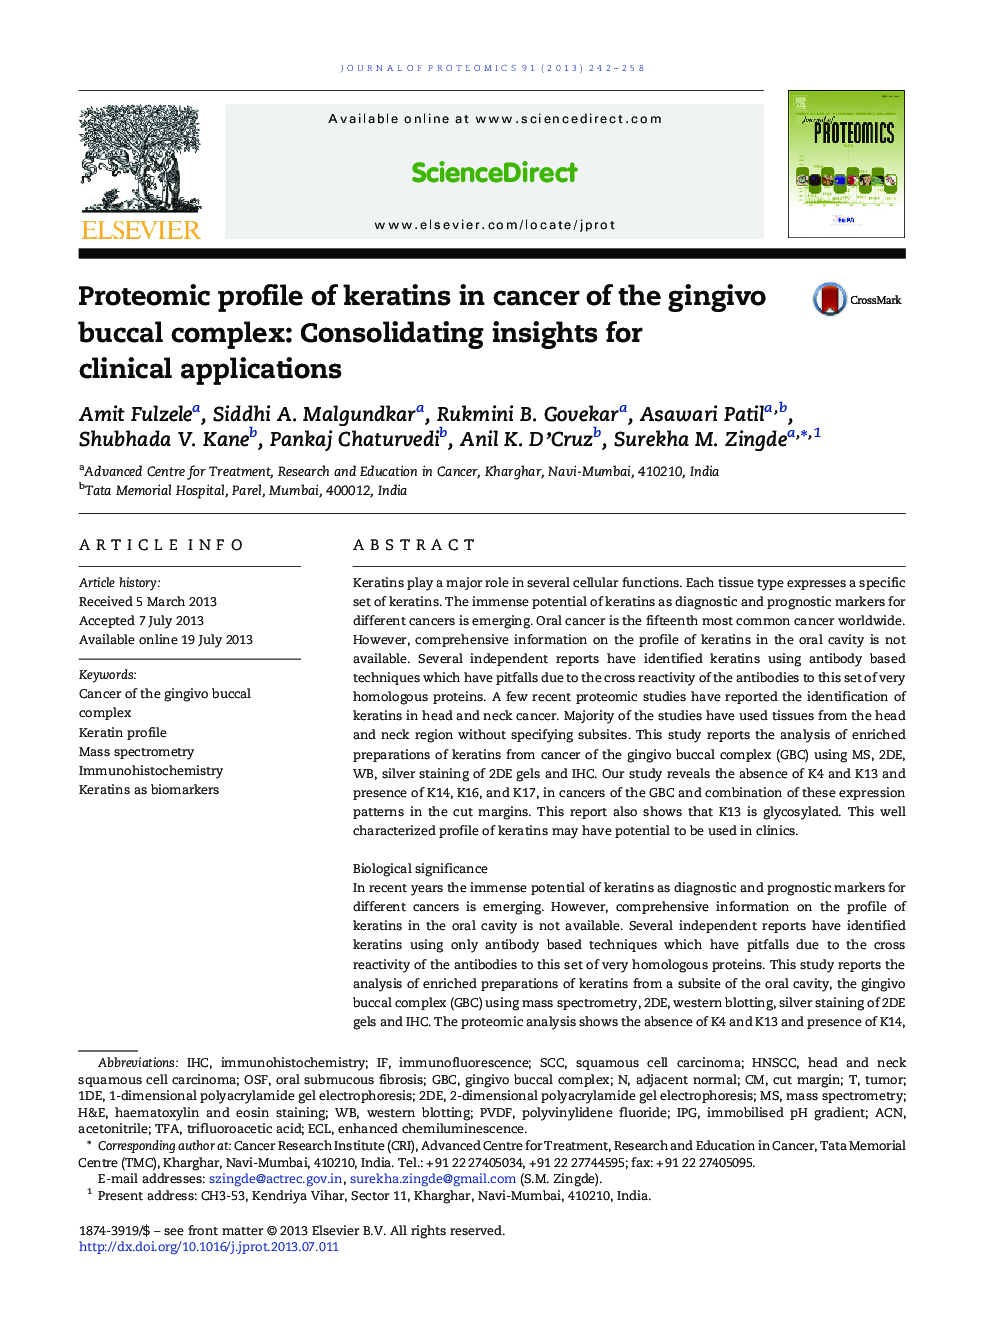 Proteomic profile of keratins in cancer of the gingivo buccal complex: Consolidating insights for clinical applications